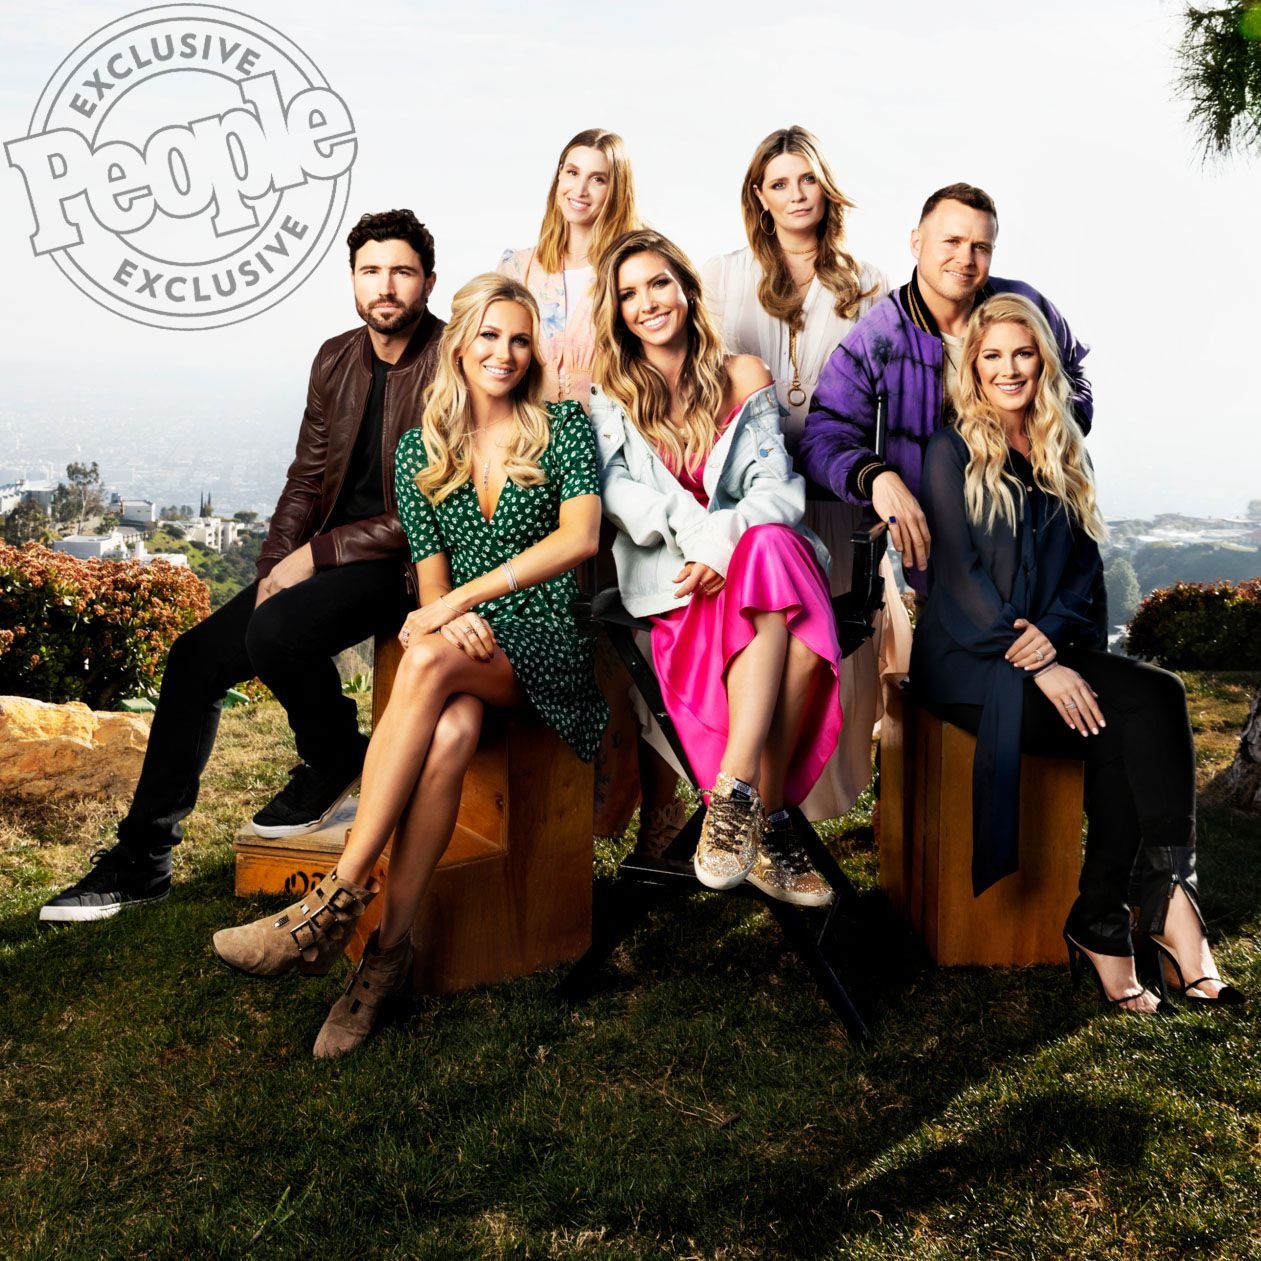 The Hills Is Coming Back! Which O.G. Cast Members Will Be Returning? And What New Names Are Joining?